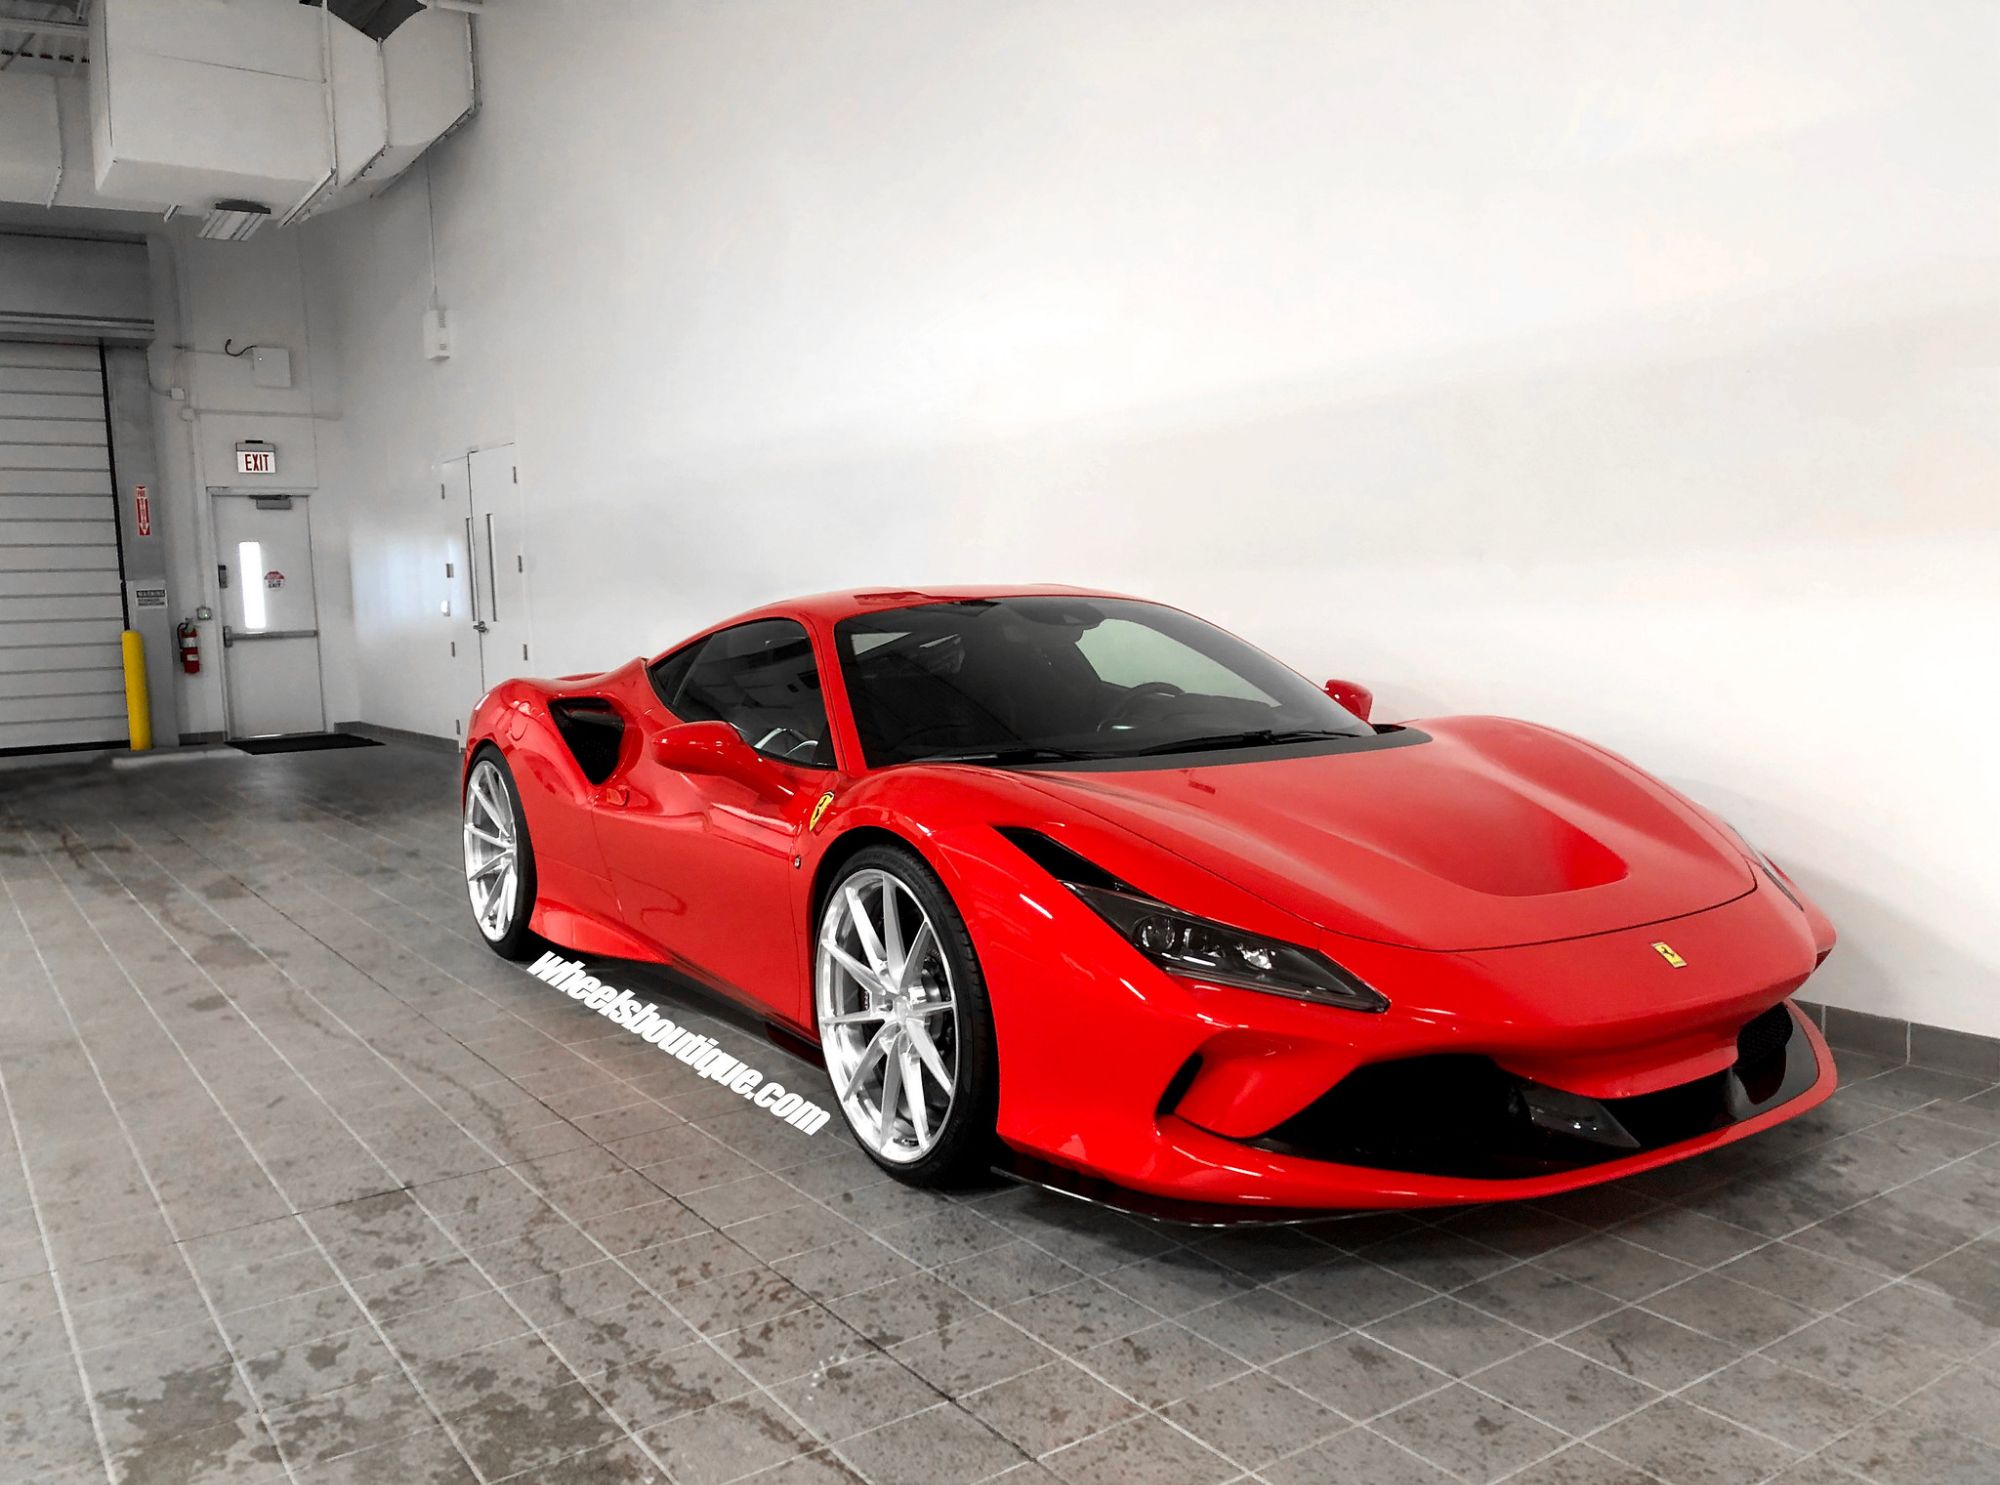 Ferrari F8 Tributo Red With Anrky An18 Aftermarket Wheels